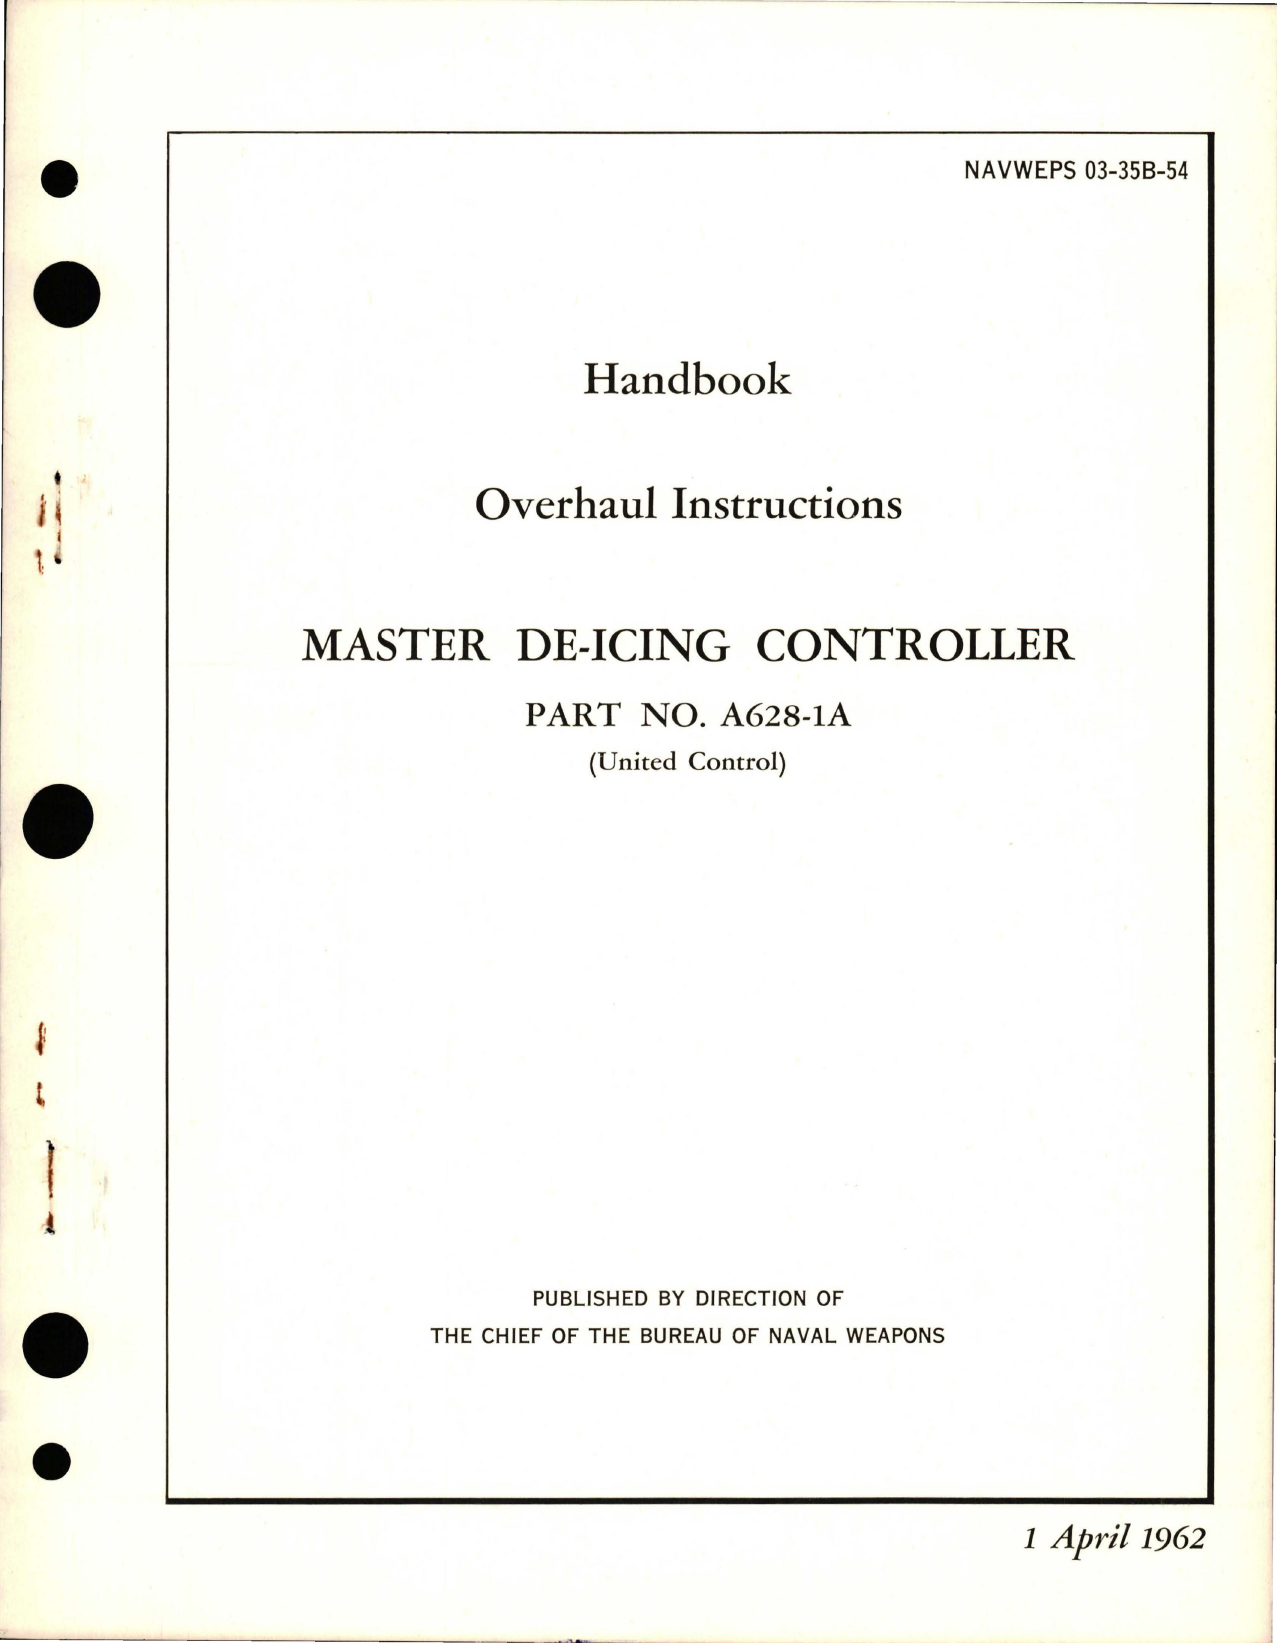 Sample page 1 from AirCorps Library document: Overhaul Instructions for Master De-Icing Controller - Part A628-1A